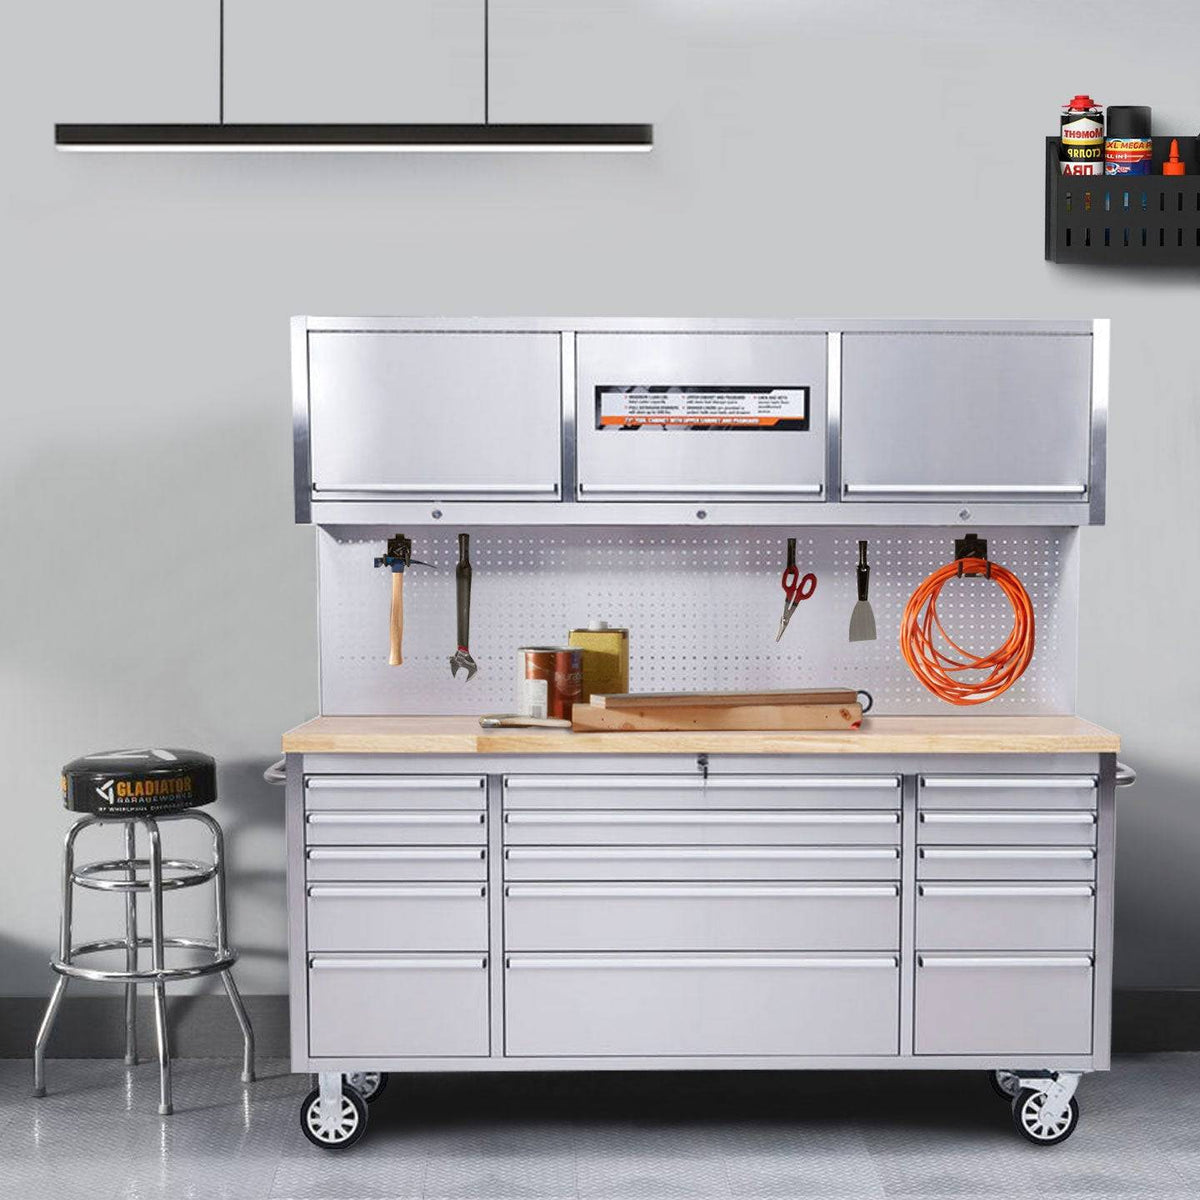 Tool Cabinet | Fobest Appliance